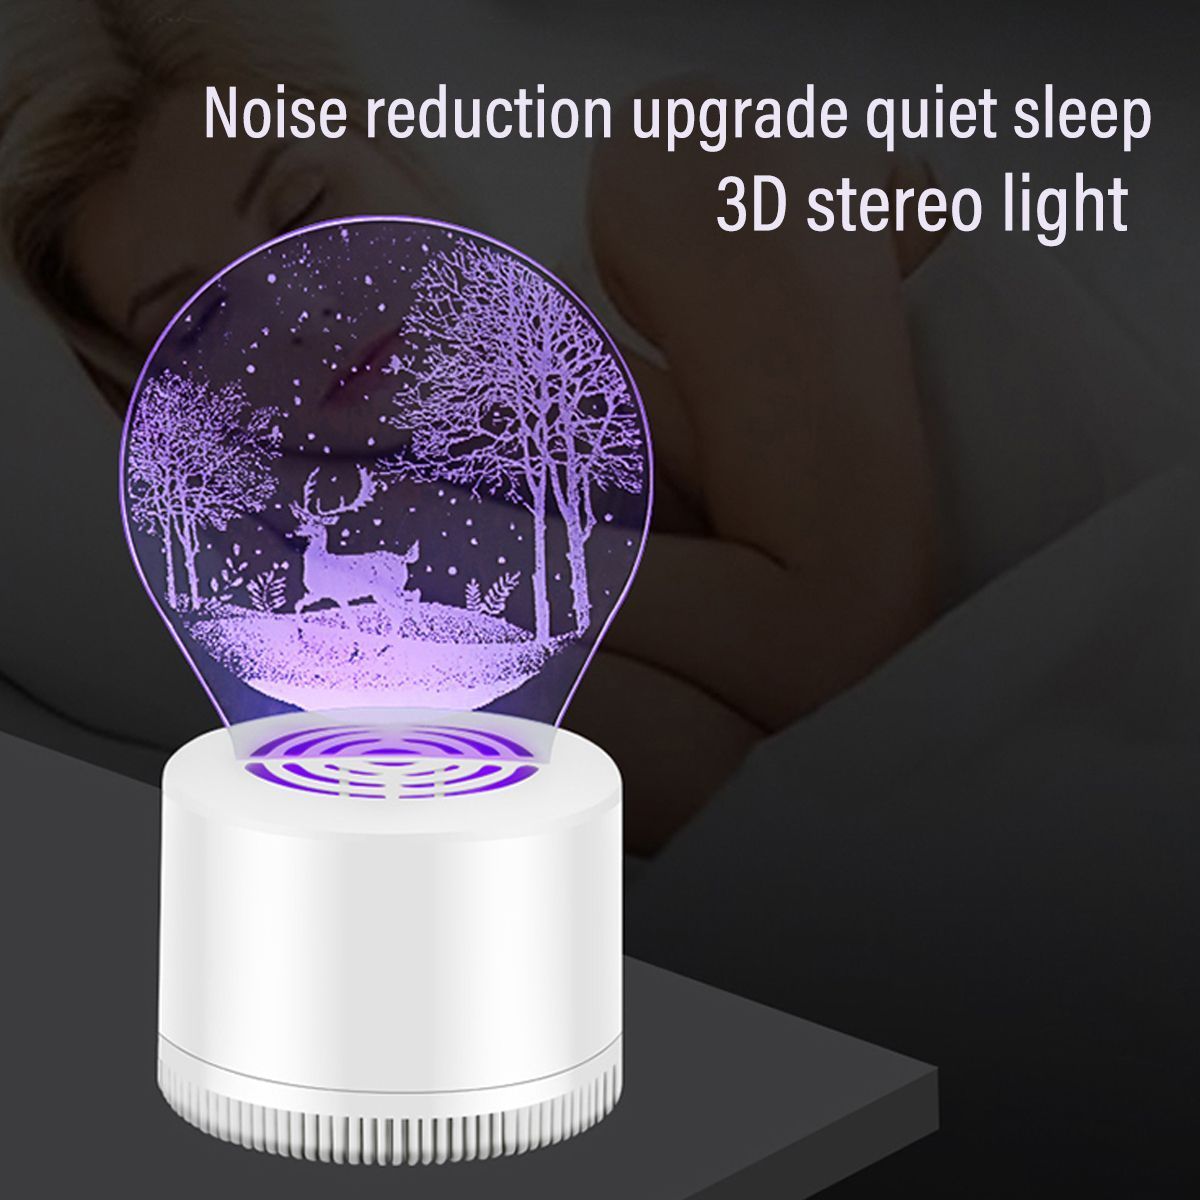 3D-Mosquito-Killer-Light-for-Indoor-use-USB-Power-Supply-No-Radiation-Safe-for-Baby-1685064